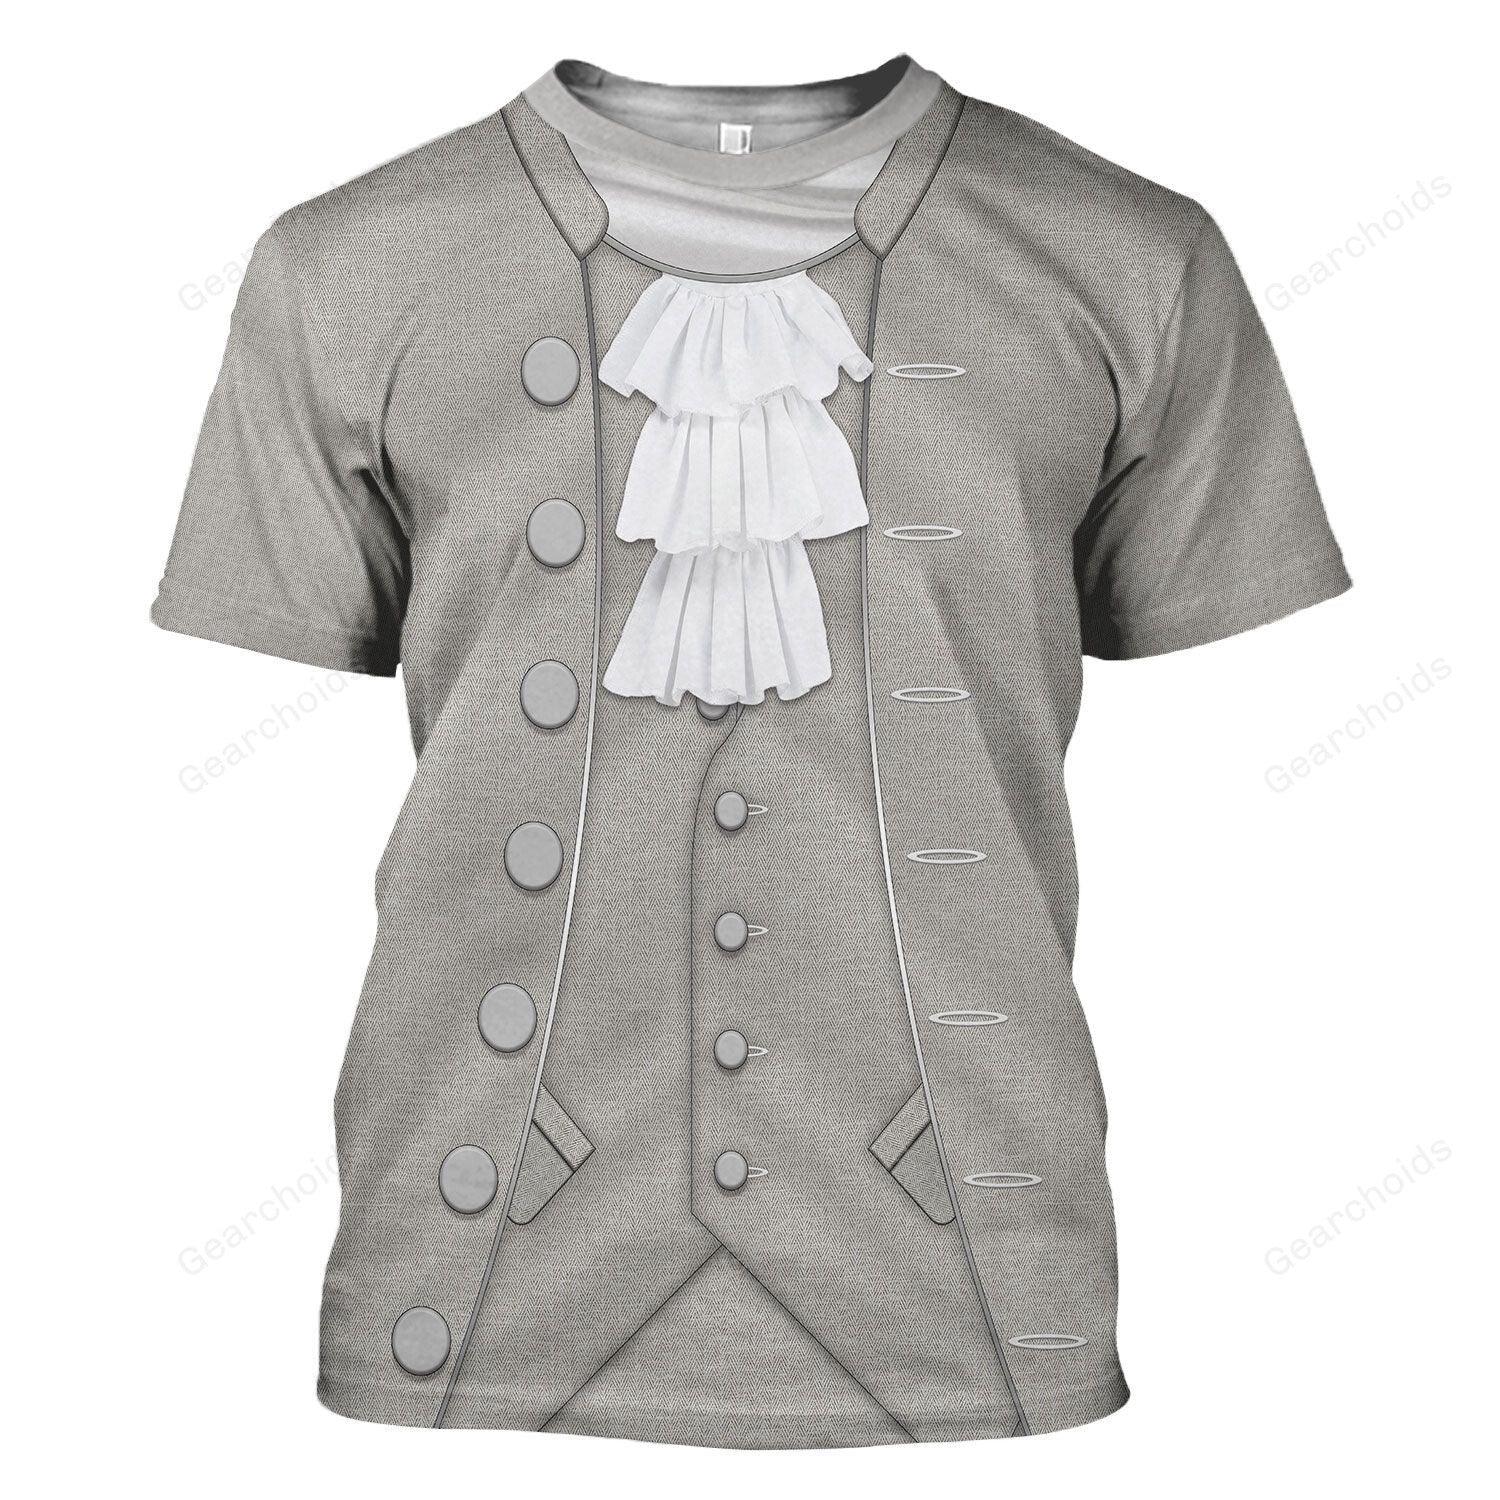 Benjamin Franklin Founding Father Of The US T-Shirt